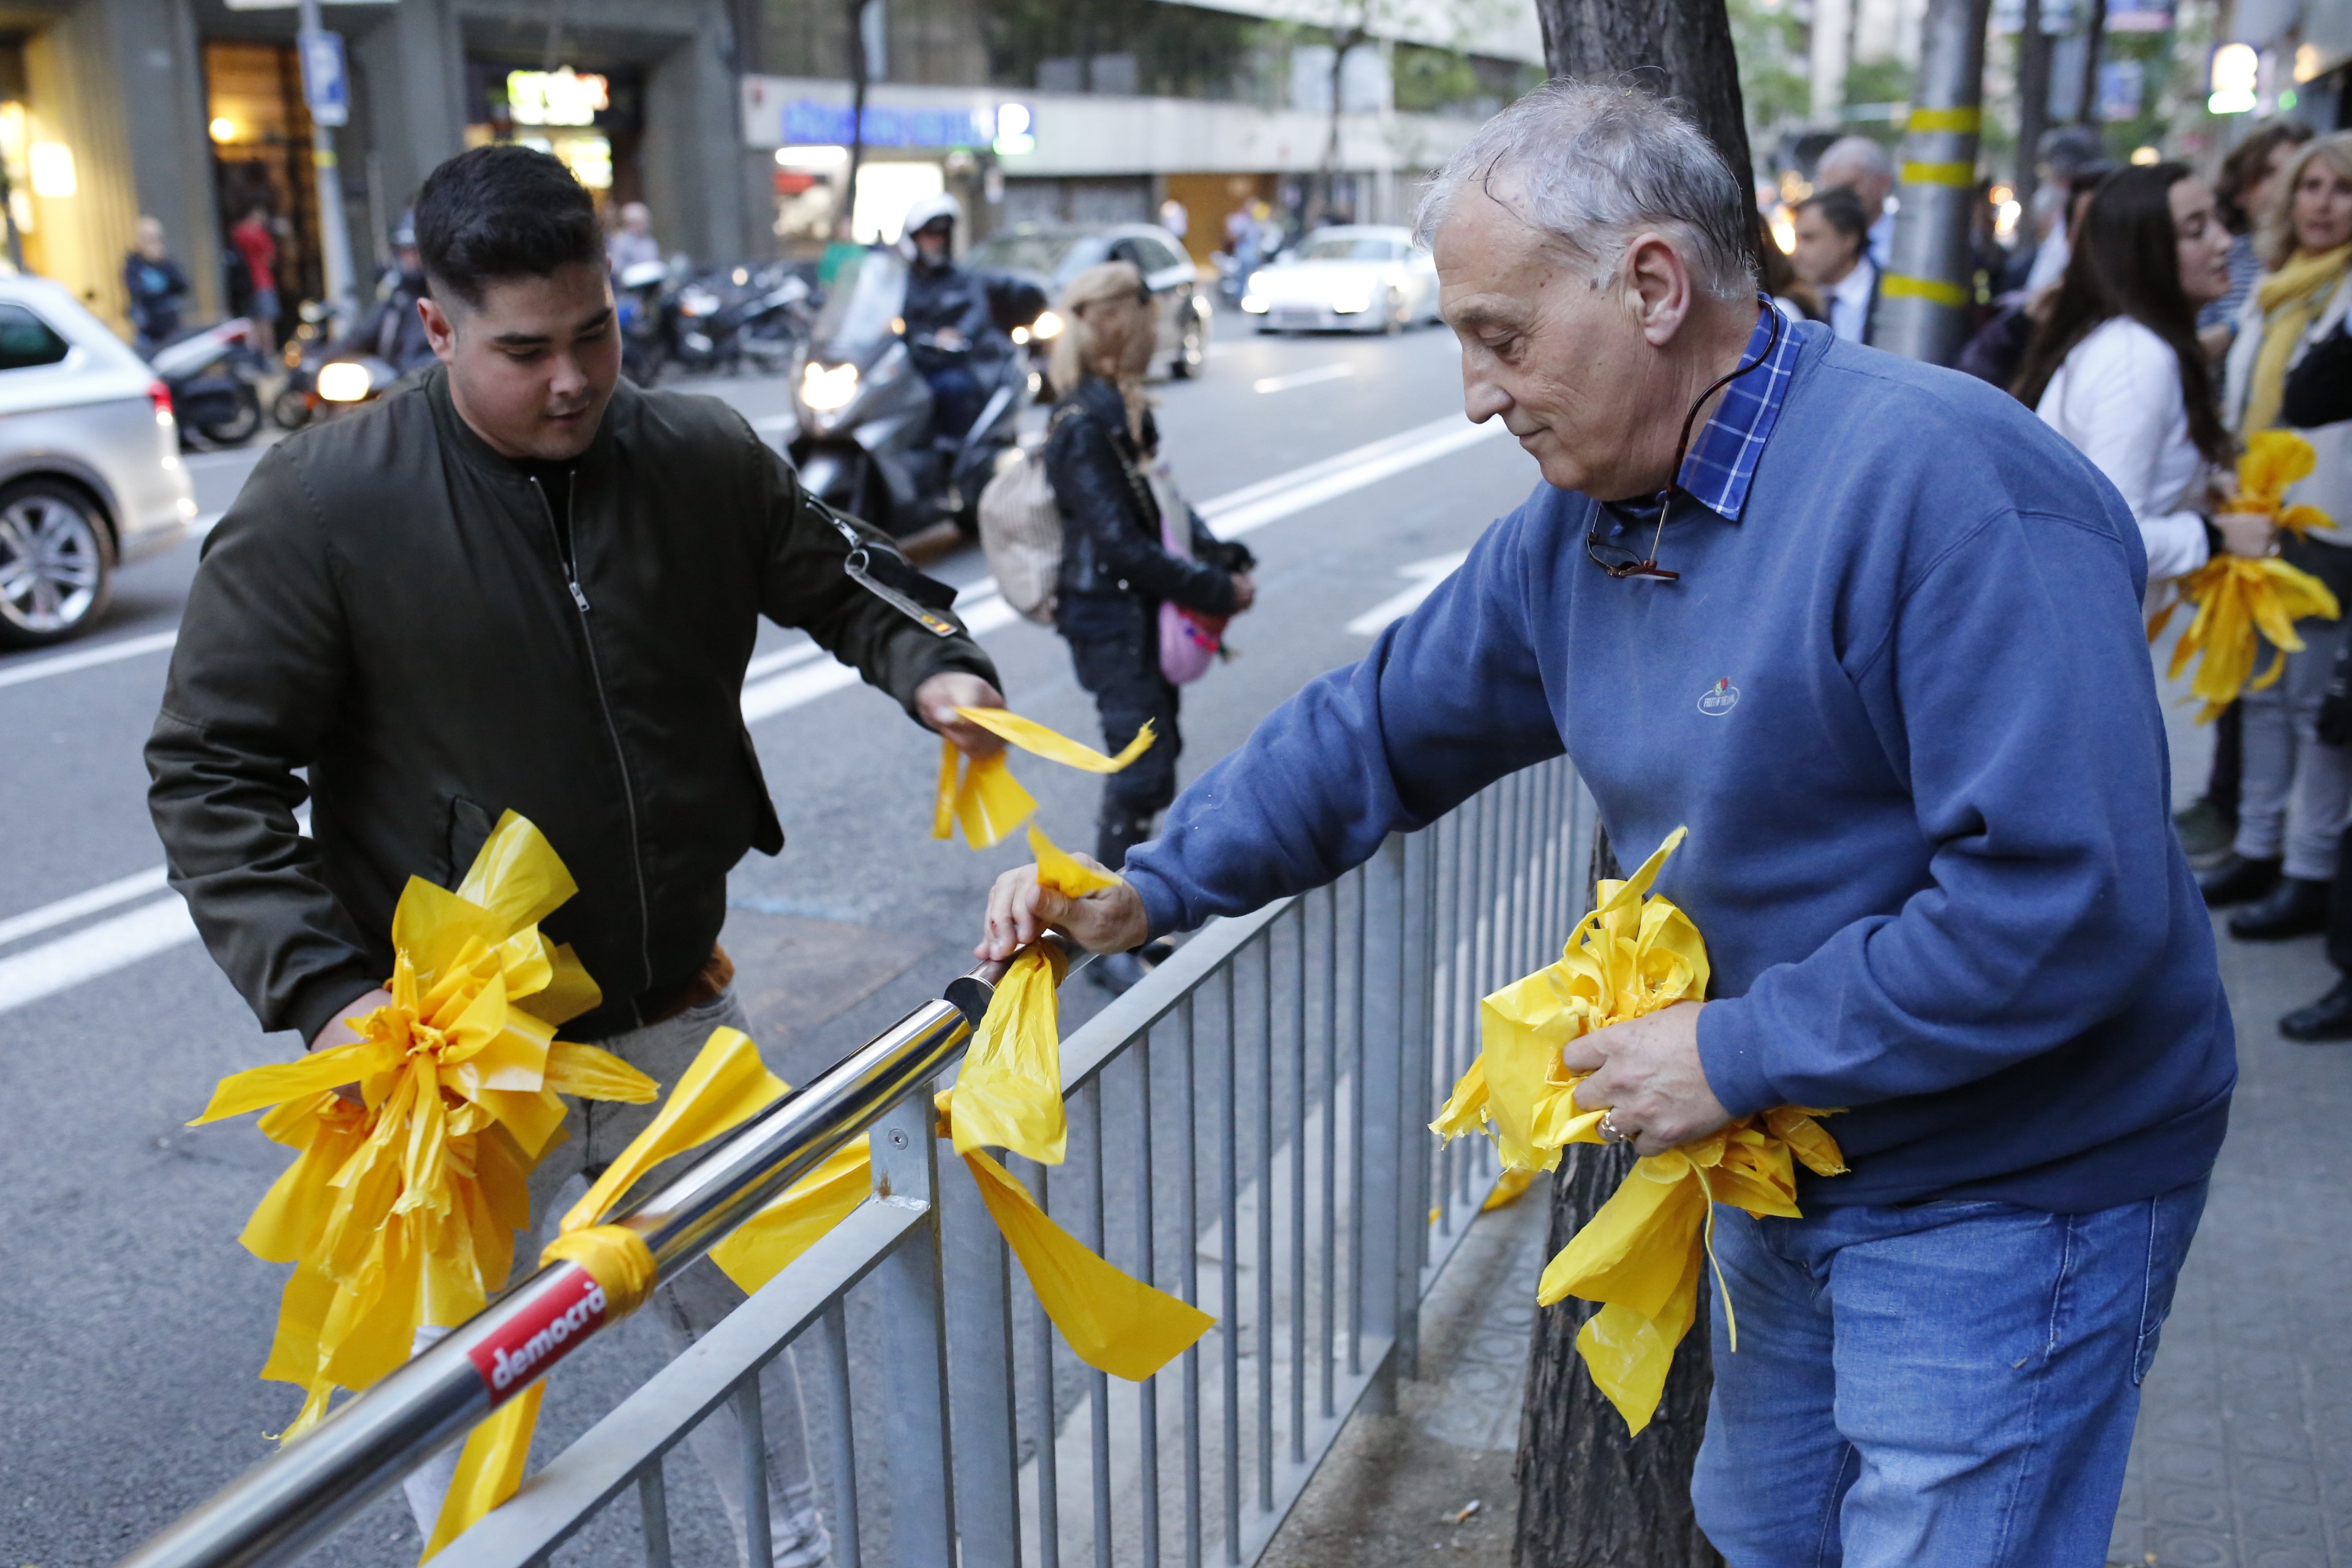 Prosecutors investigating Catalan police's actions identifying people removing yellow loops